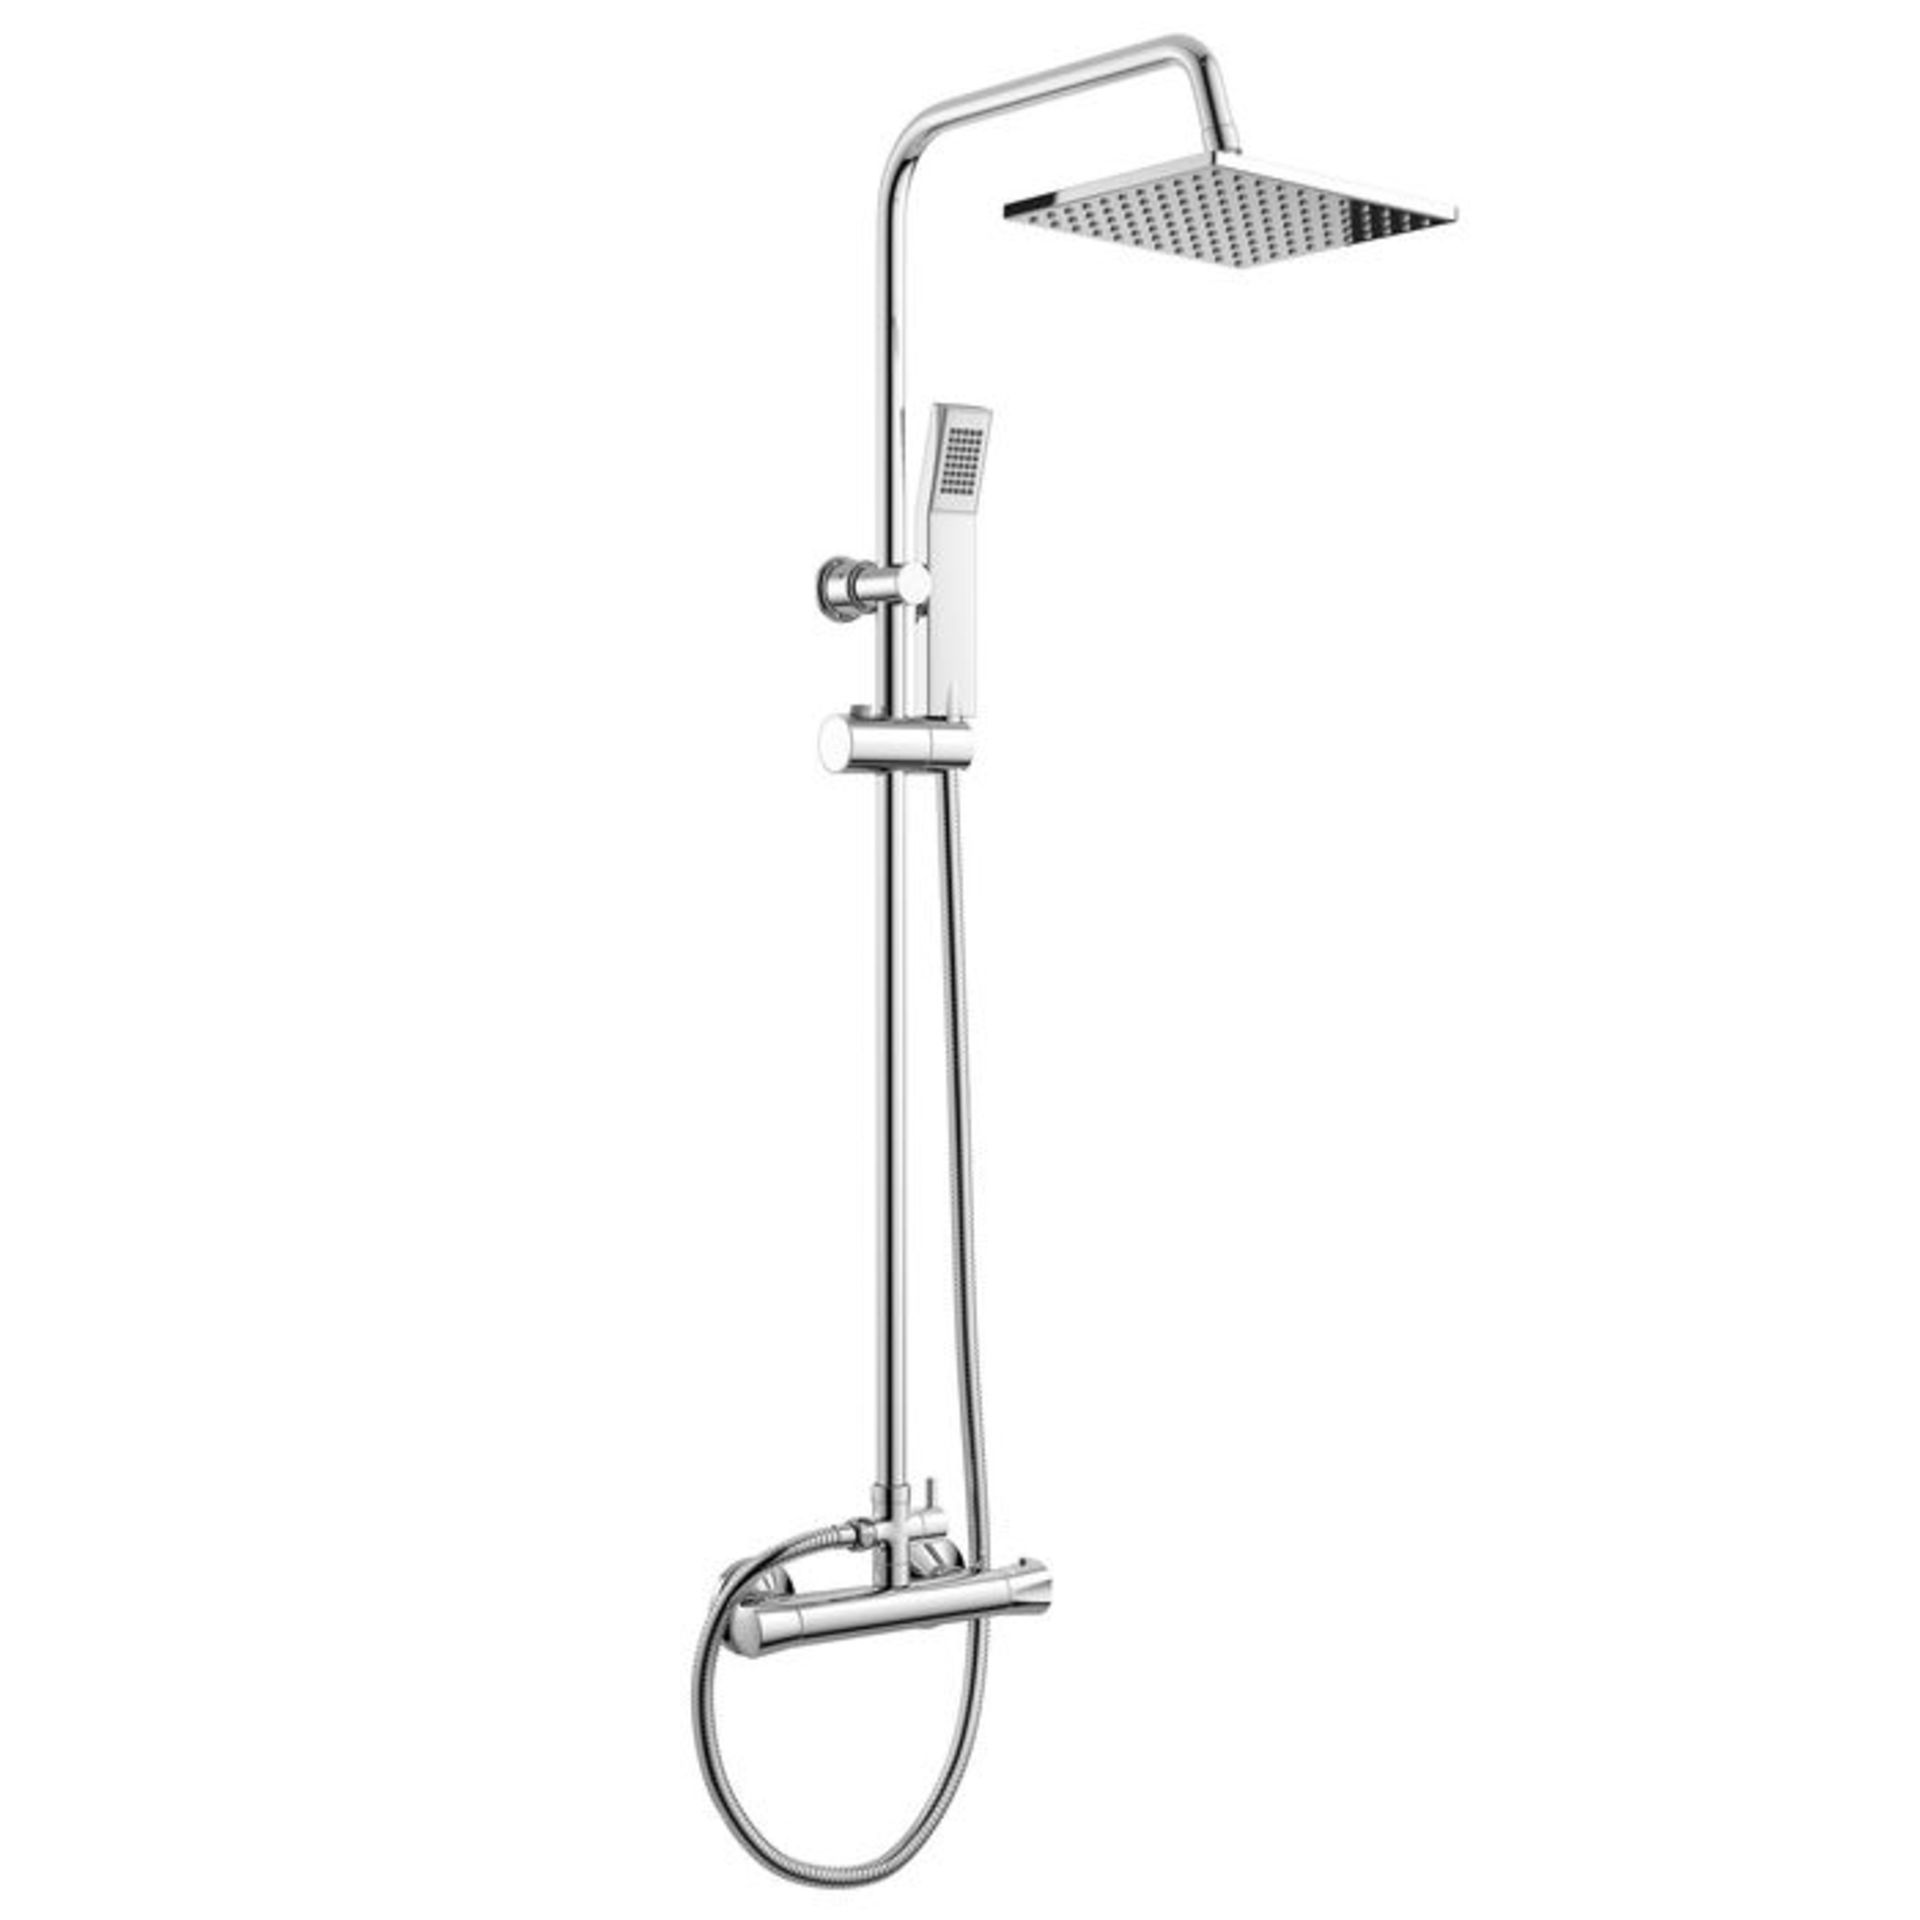 (E62) 200mm Square Head Thermostatic Exposed Shower Kit Hand Held. We love this because it